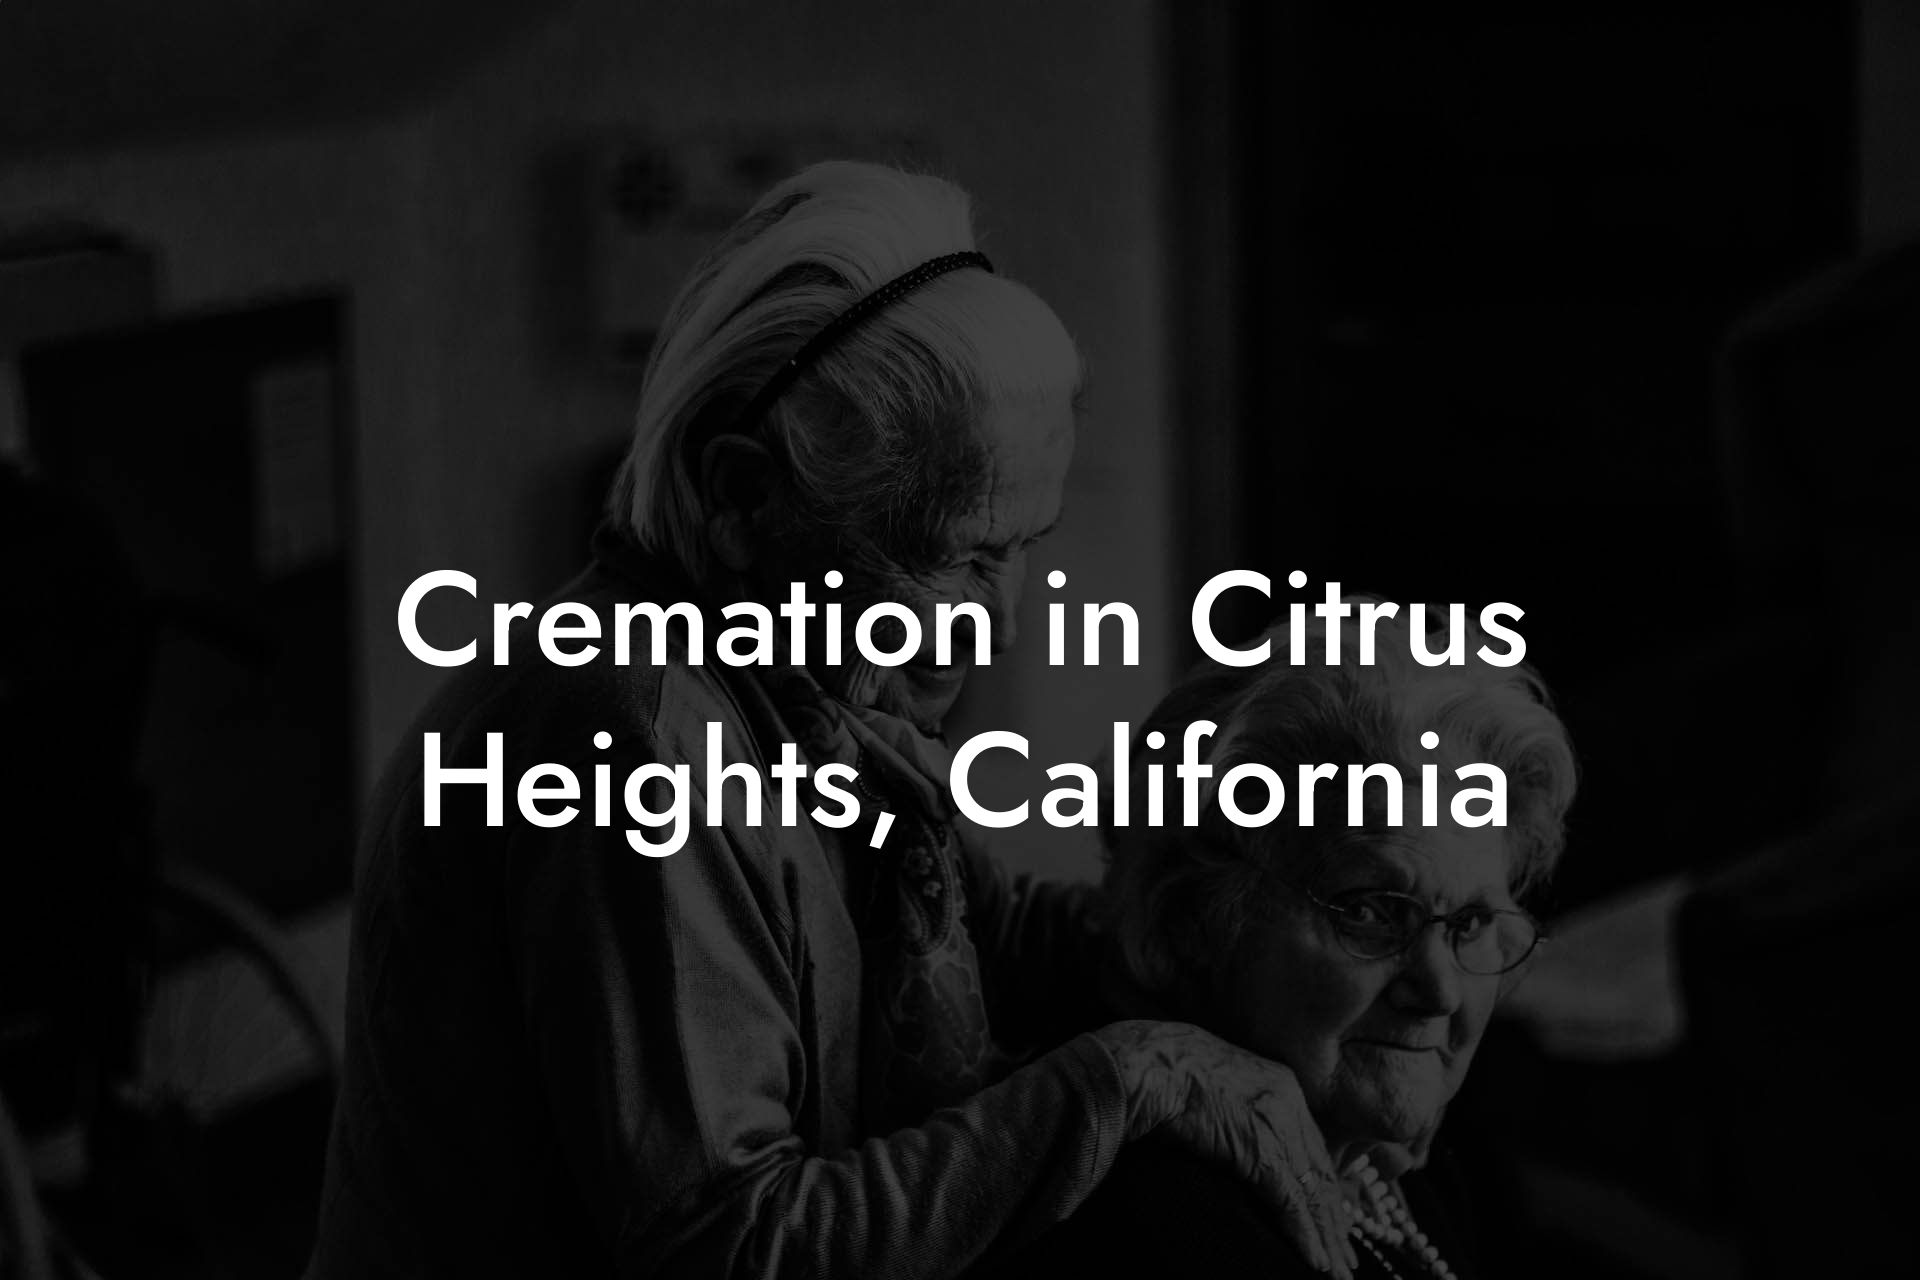 Cremation in Citrus Heights, California